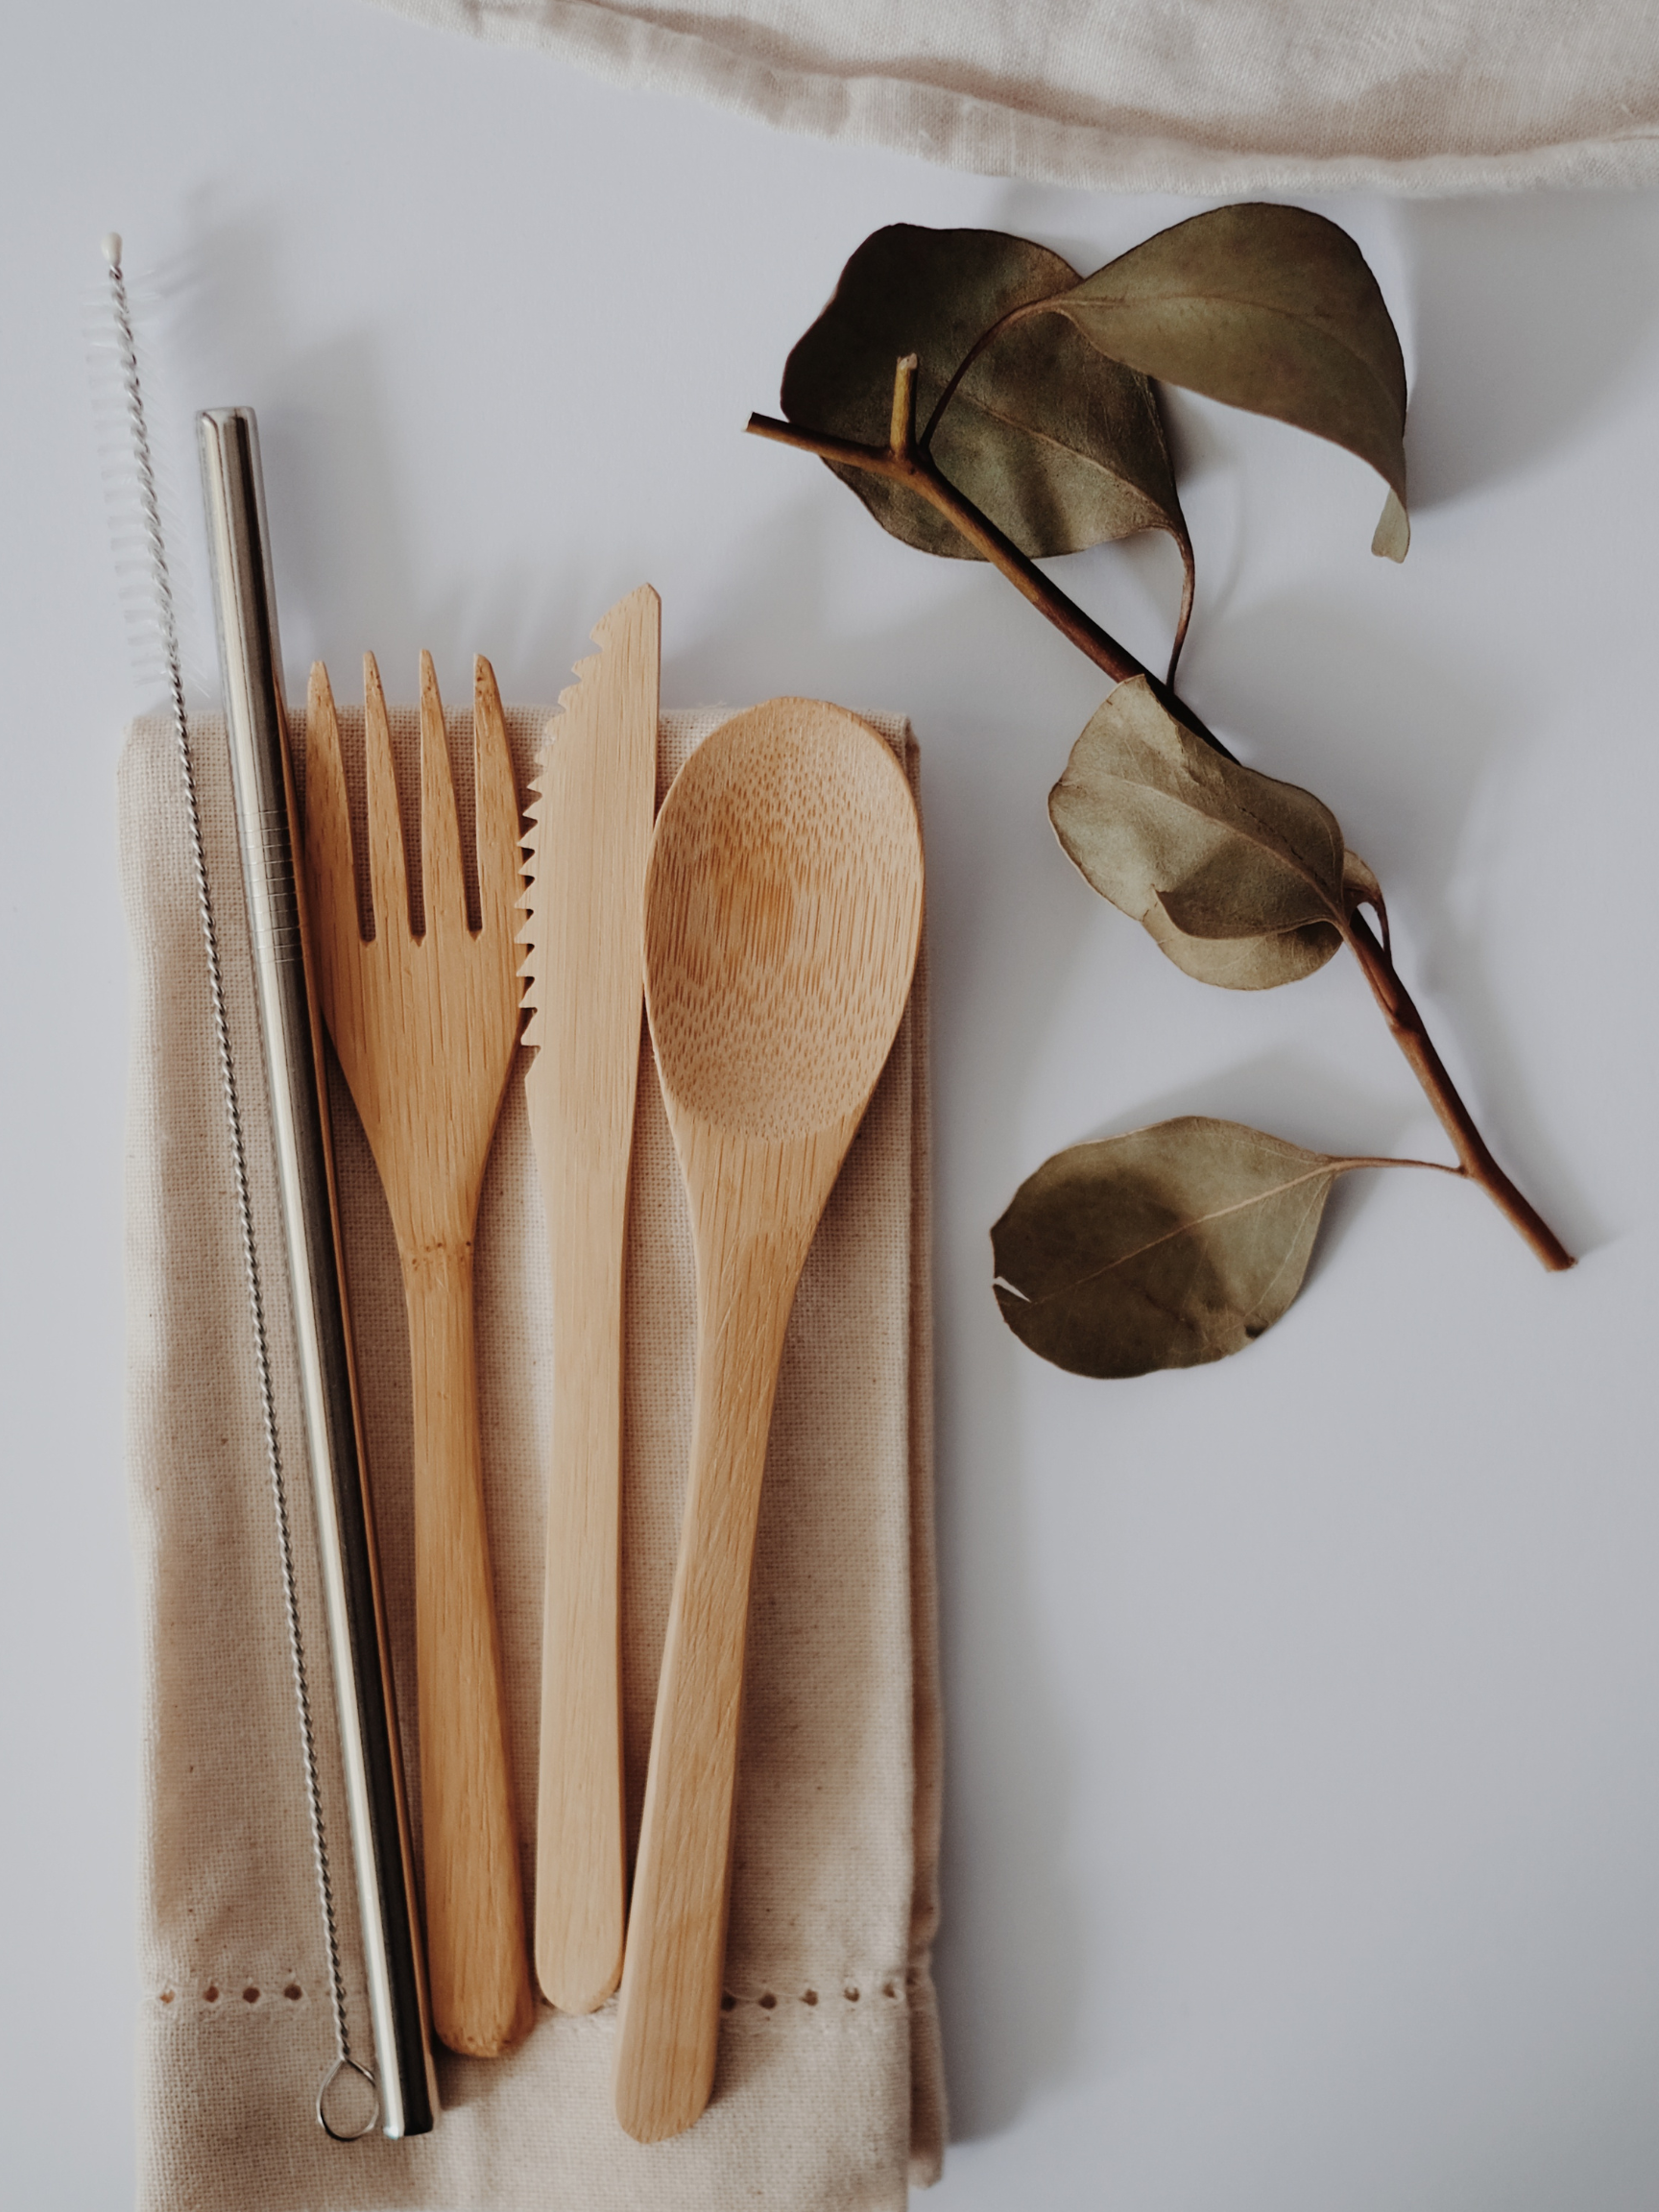 Deciding to use recyclable utensils is a great way to have an Earth-friendly wedding